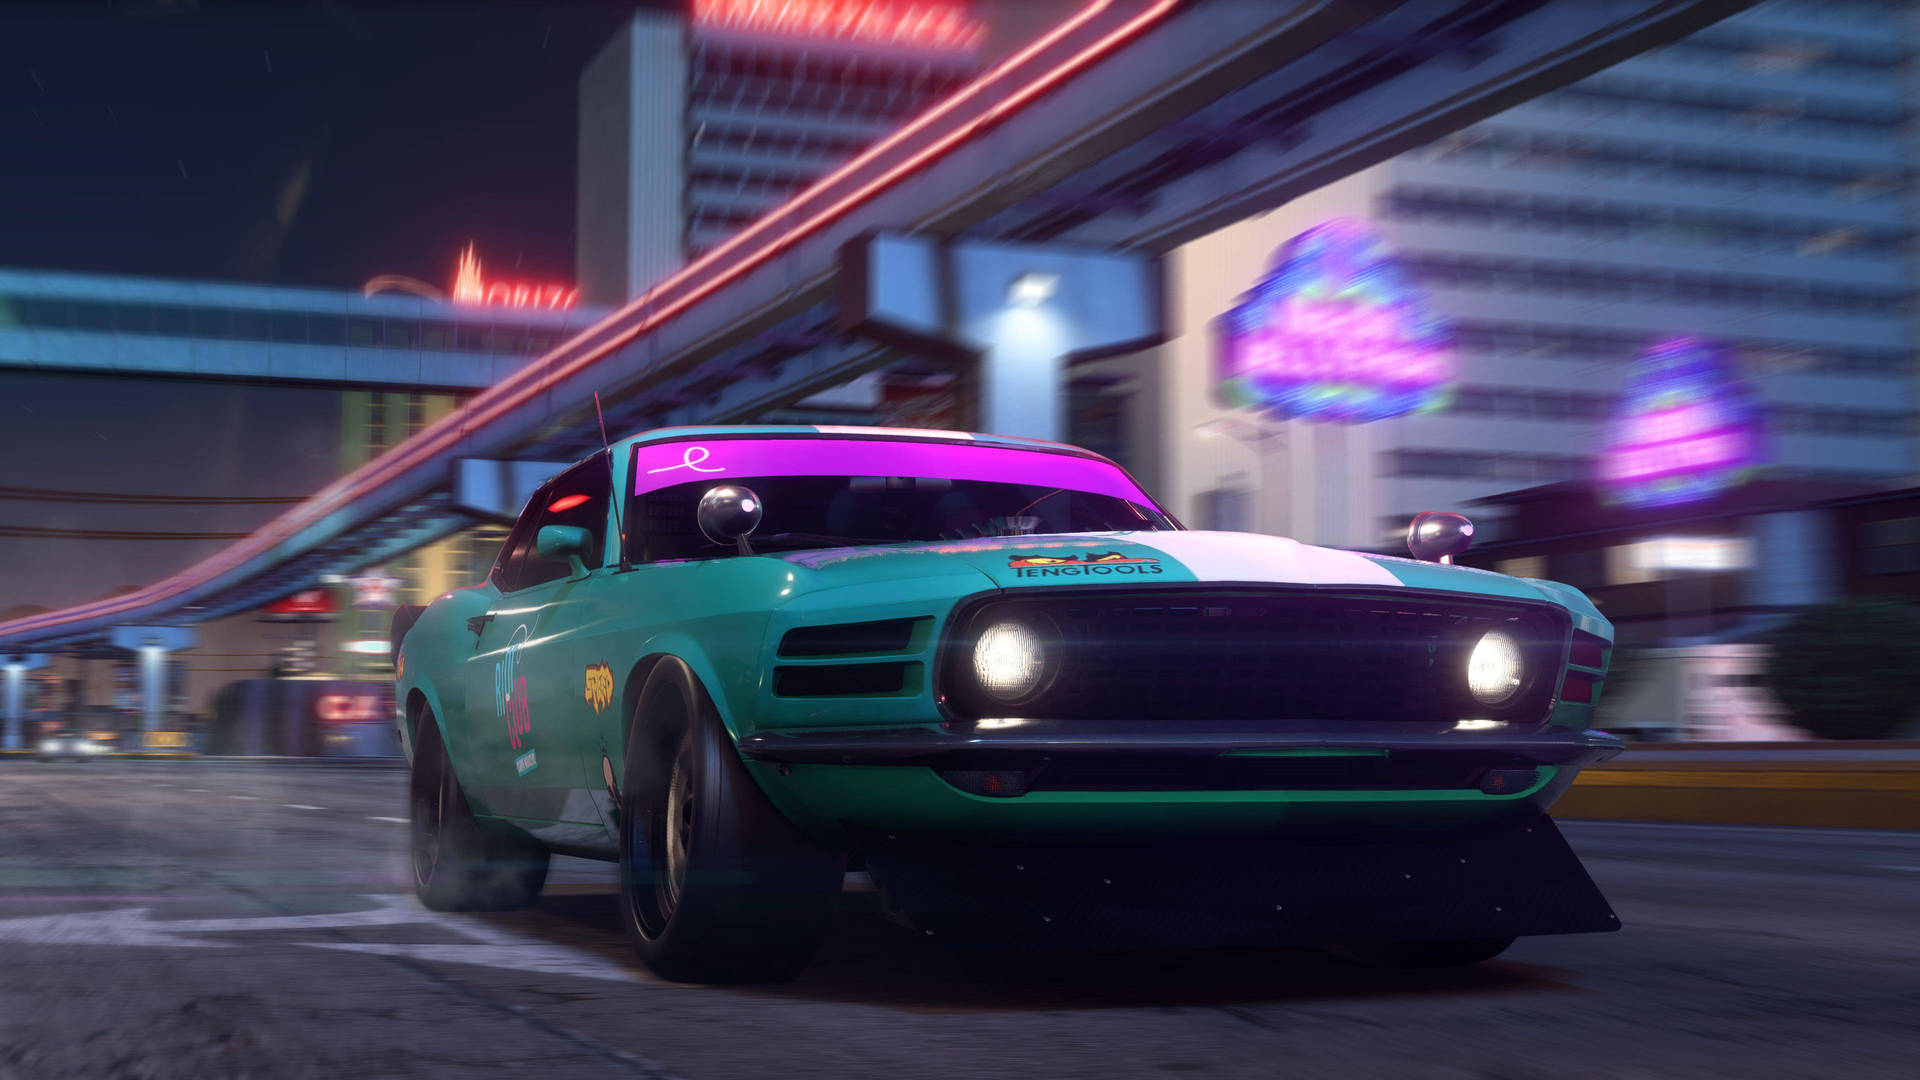 Need For Speed Payback Teal Dodge Background